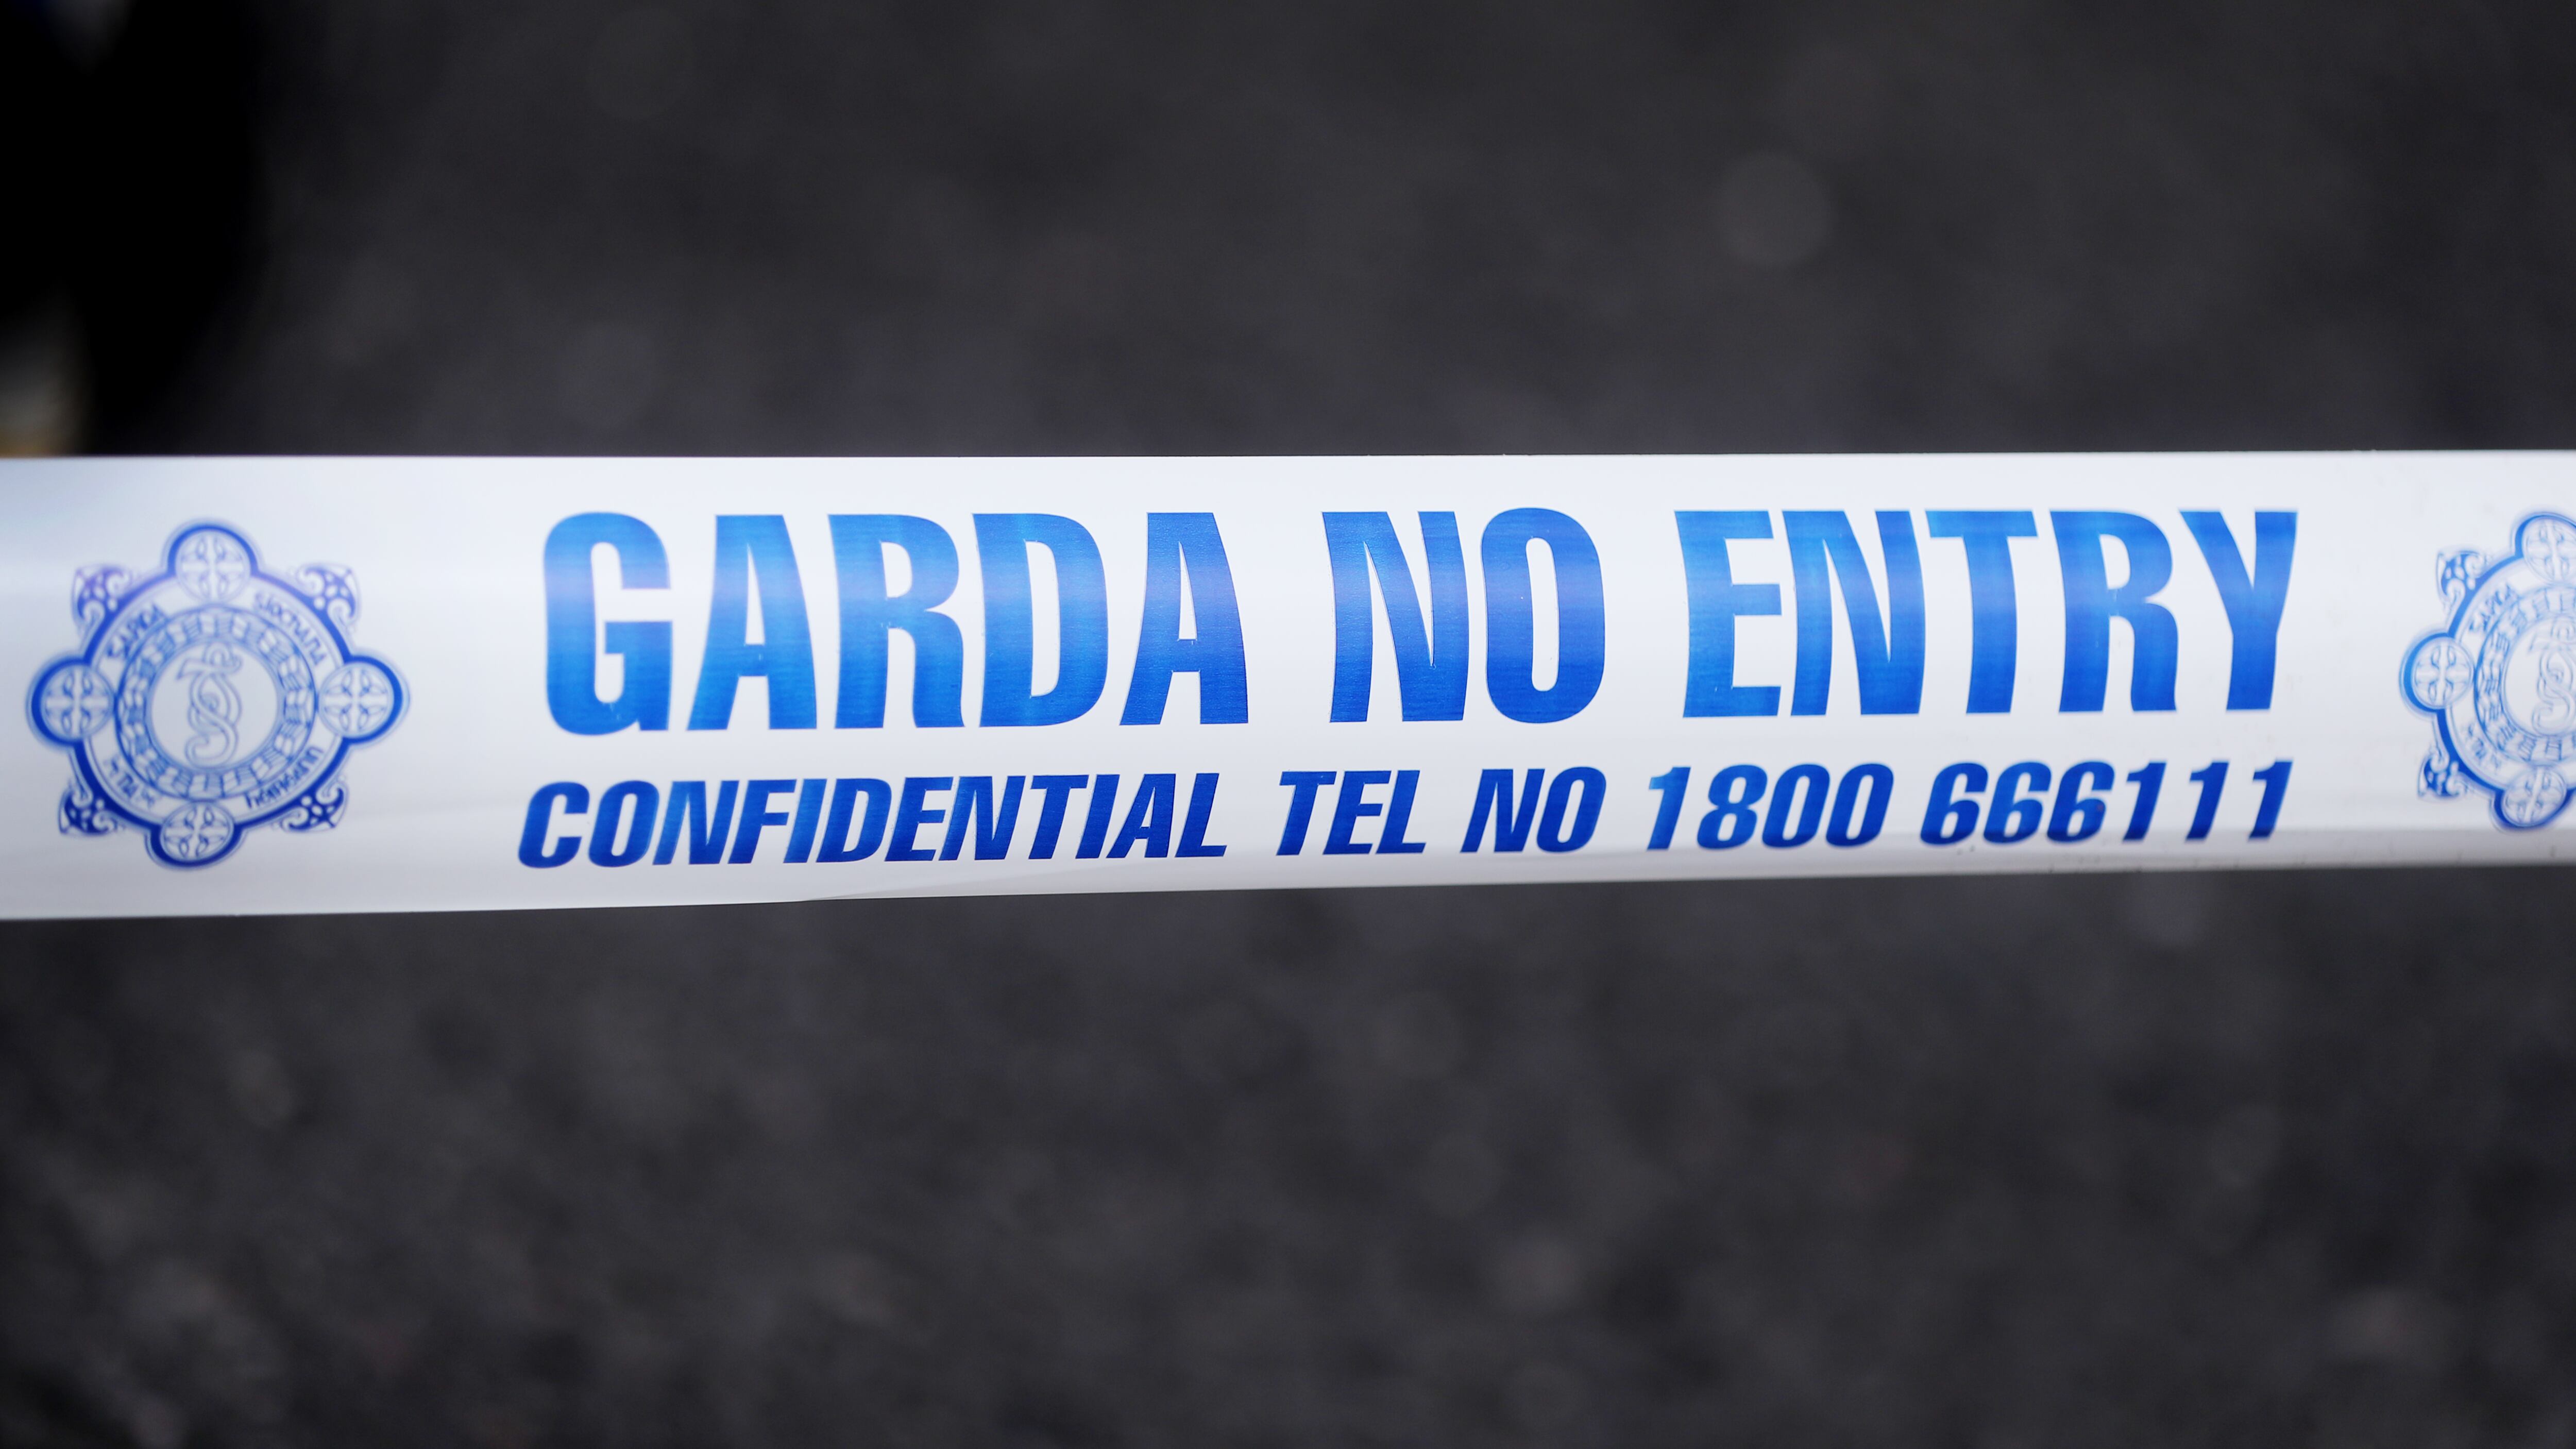 A pit-bull terrier was shot and killed by gardai after it attacked a man and woman at a house in Cork